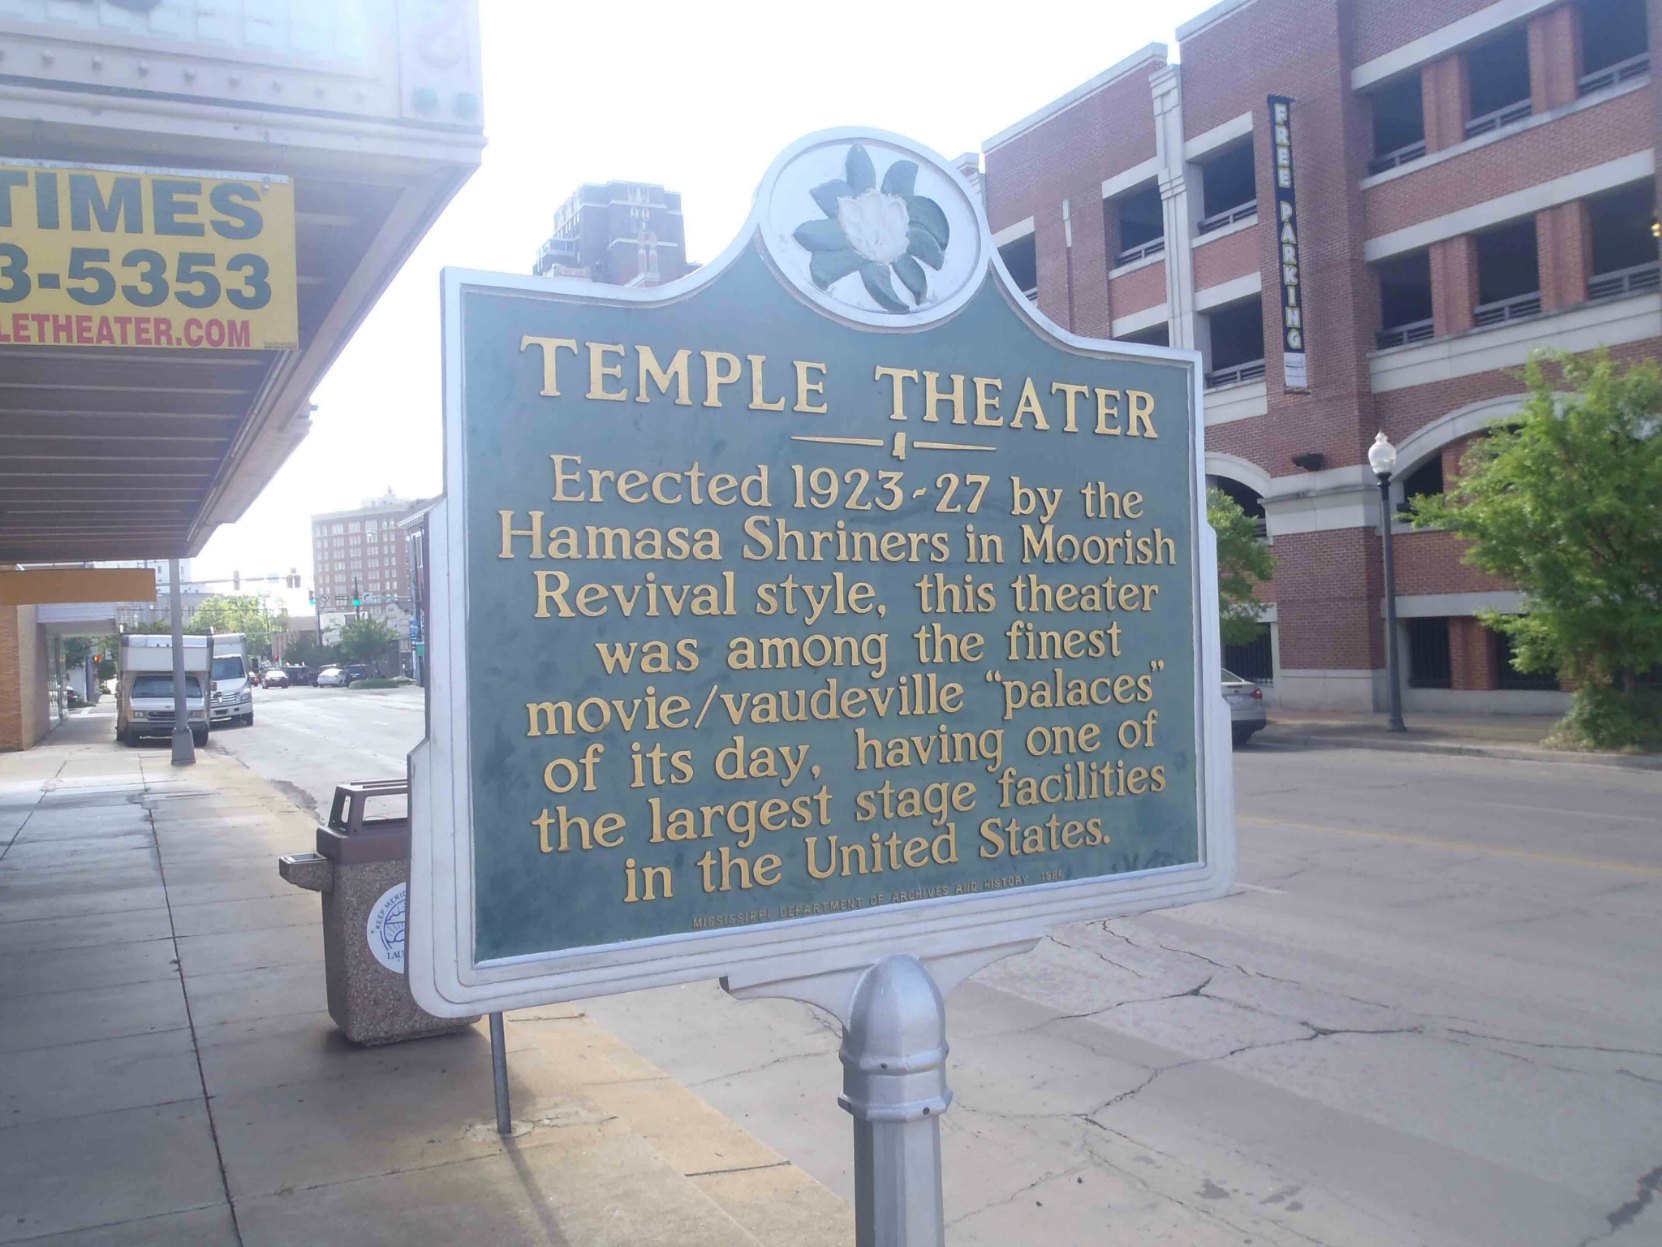 Mississippi Department of Archives & History marker outside the Temple Theater, Meridian, Mississippi.